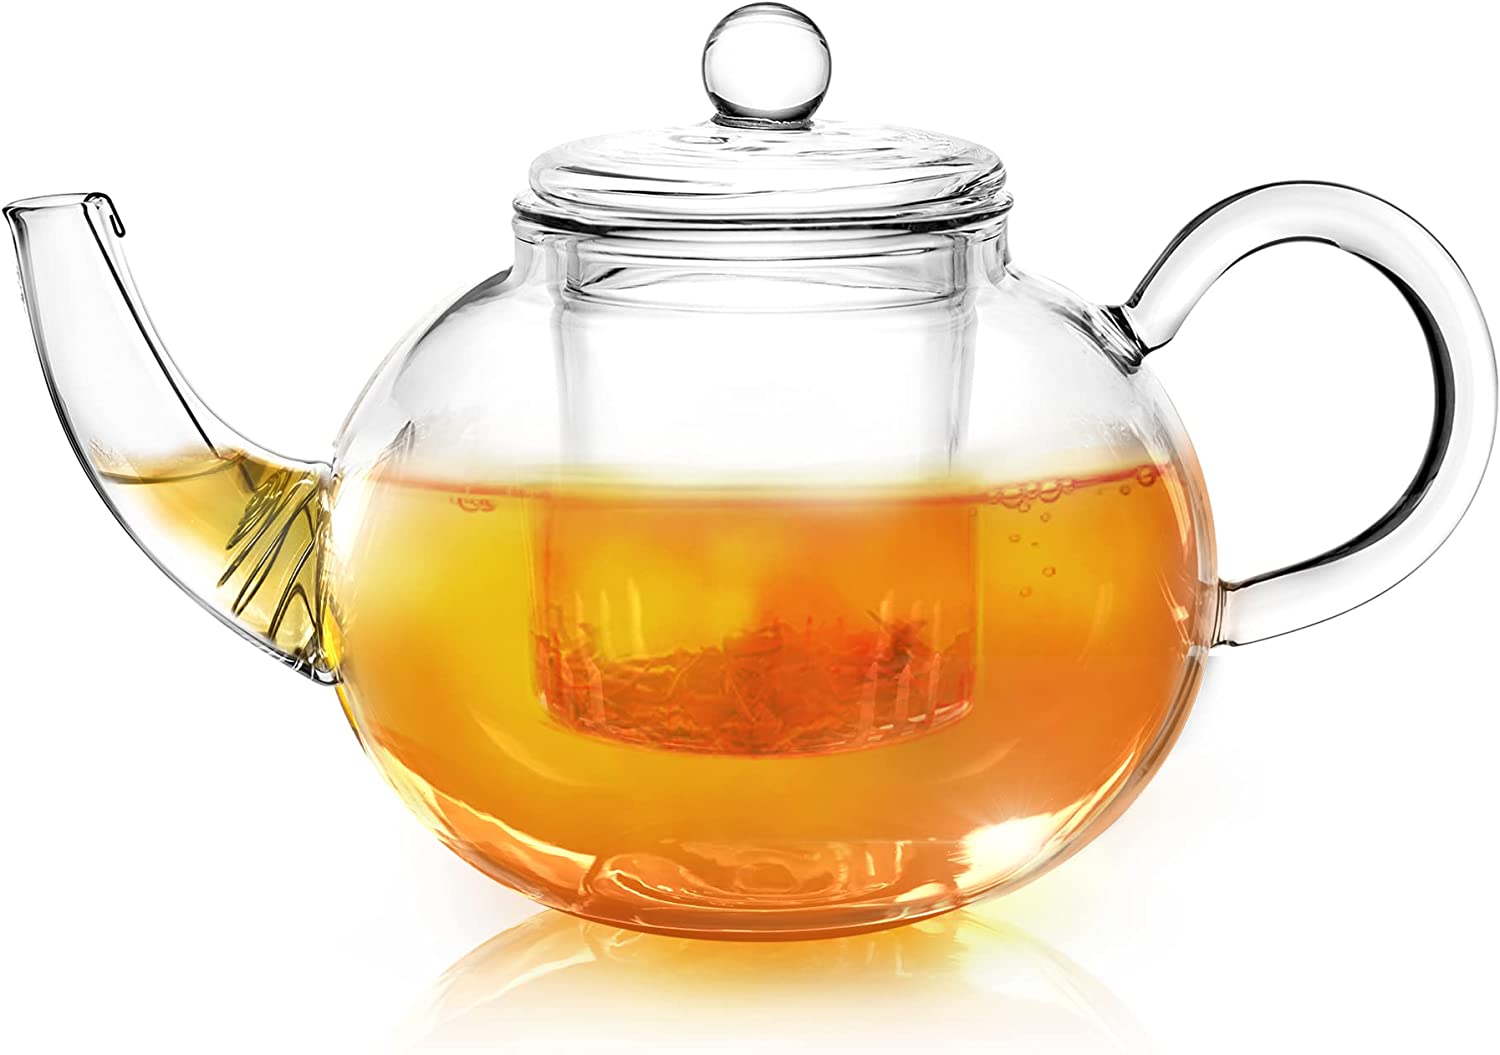 Impolio Teapot with glass strainer insert, heat-resistant made of borosilicate glass, tea service, teapot glass (900 ml), glass teapot with strainer insert, the tea maker for any season.